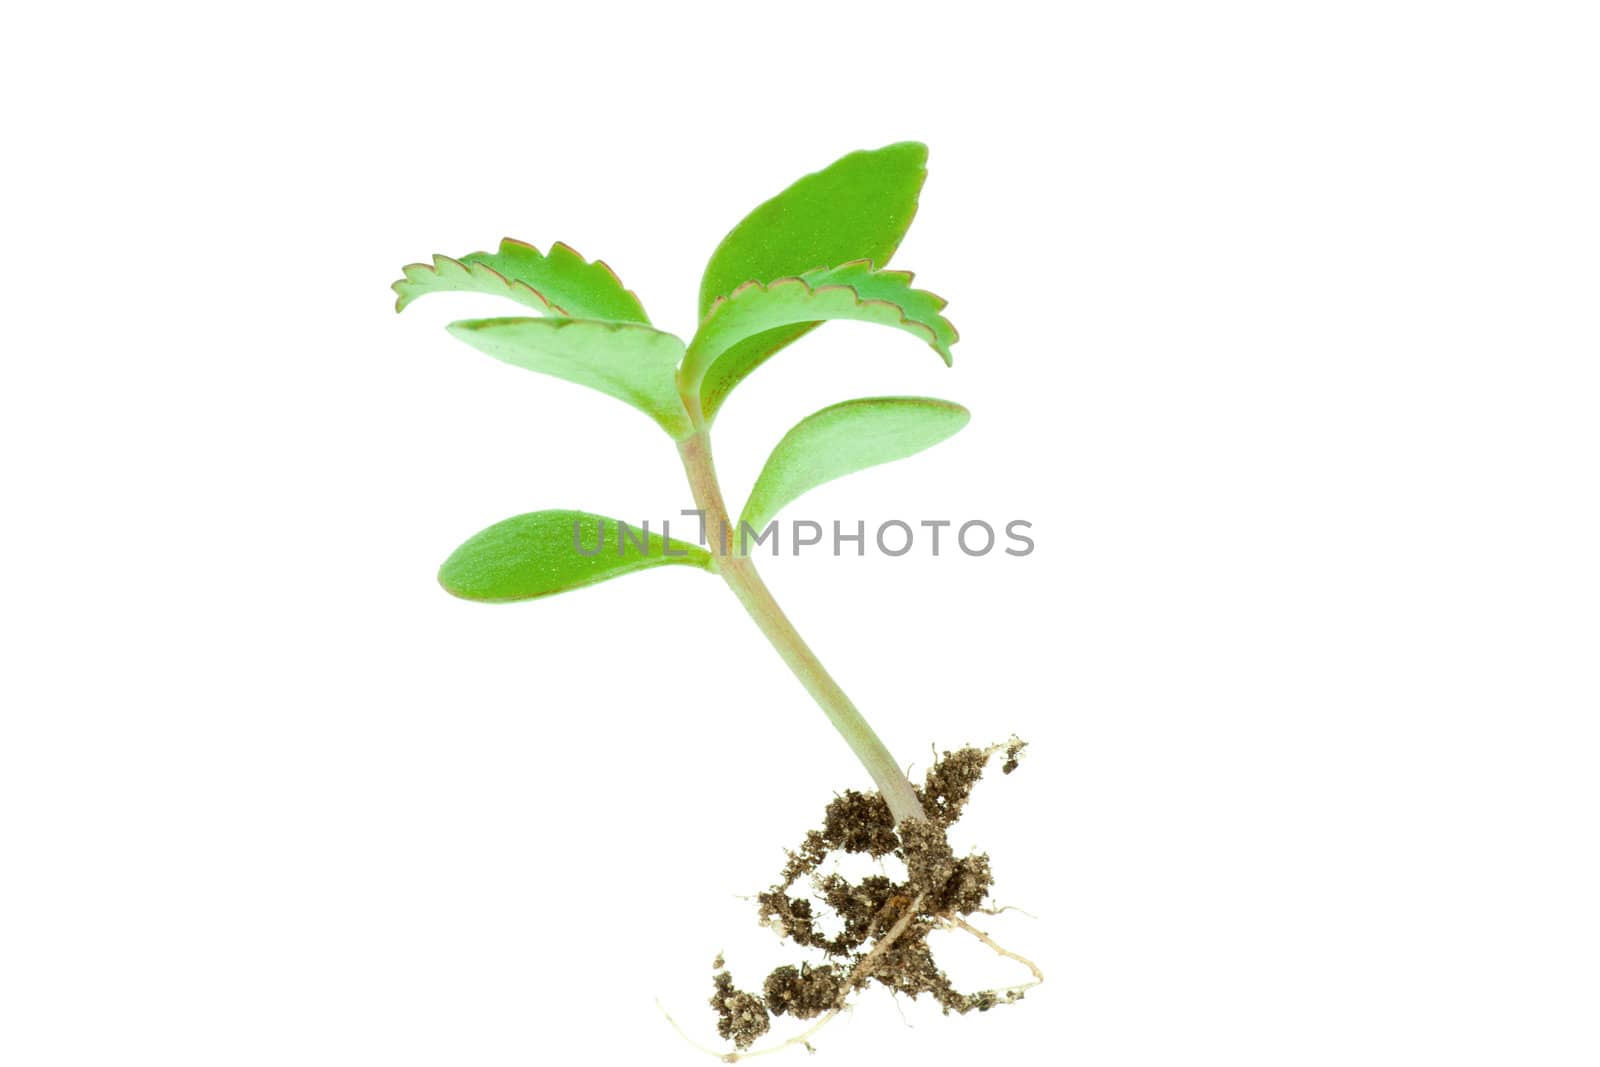 Young seedling growing in a soil isolated on white